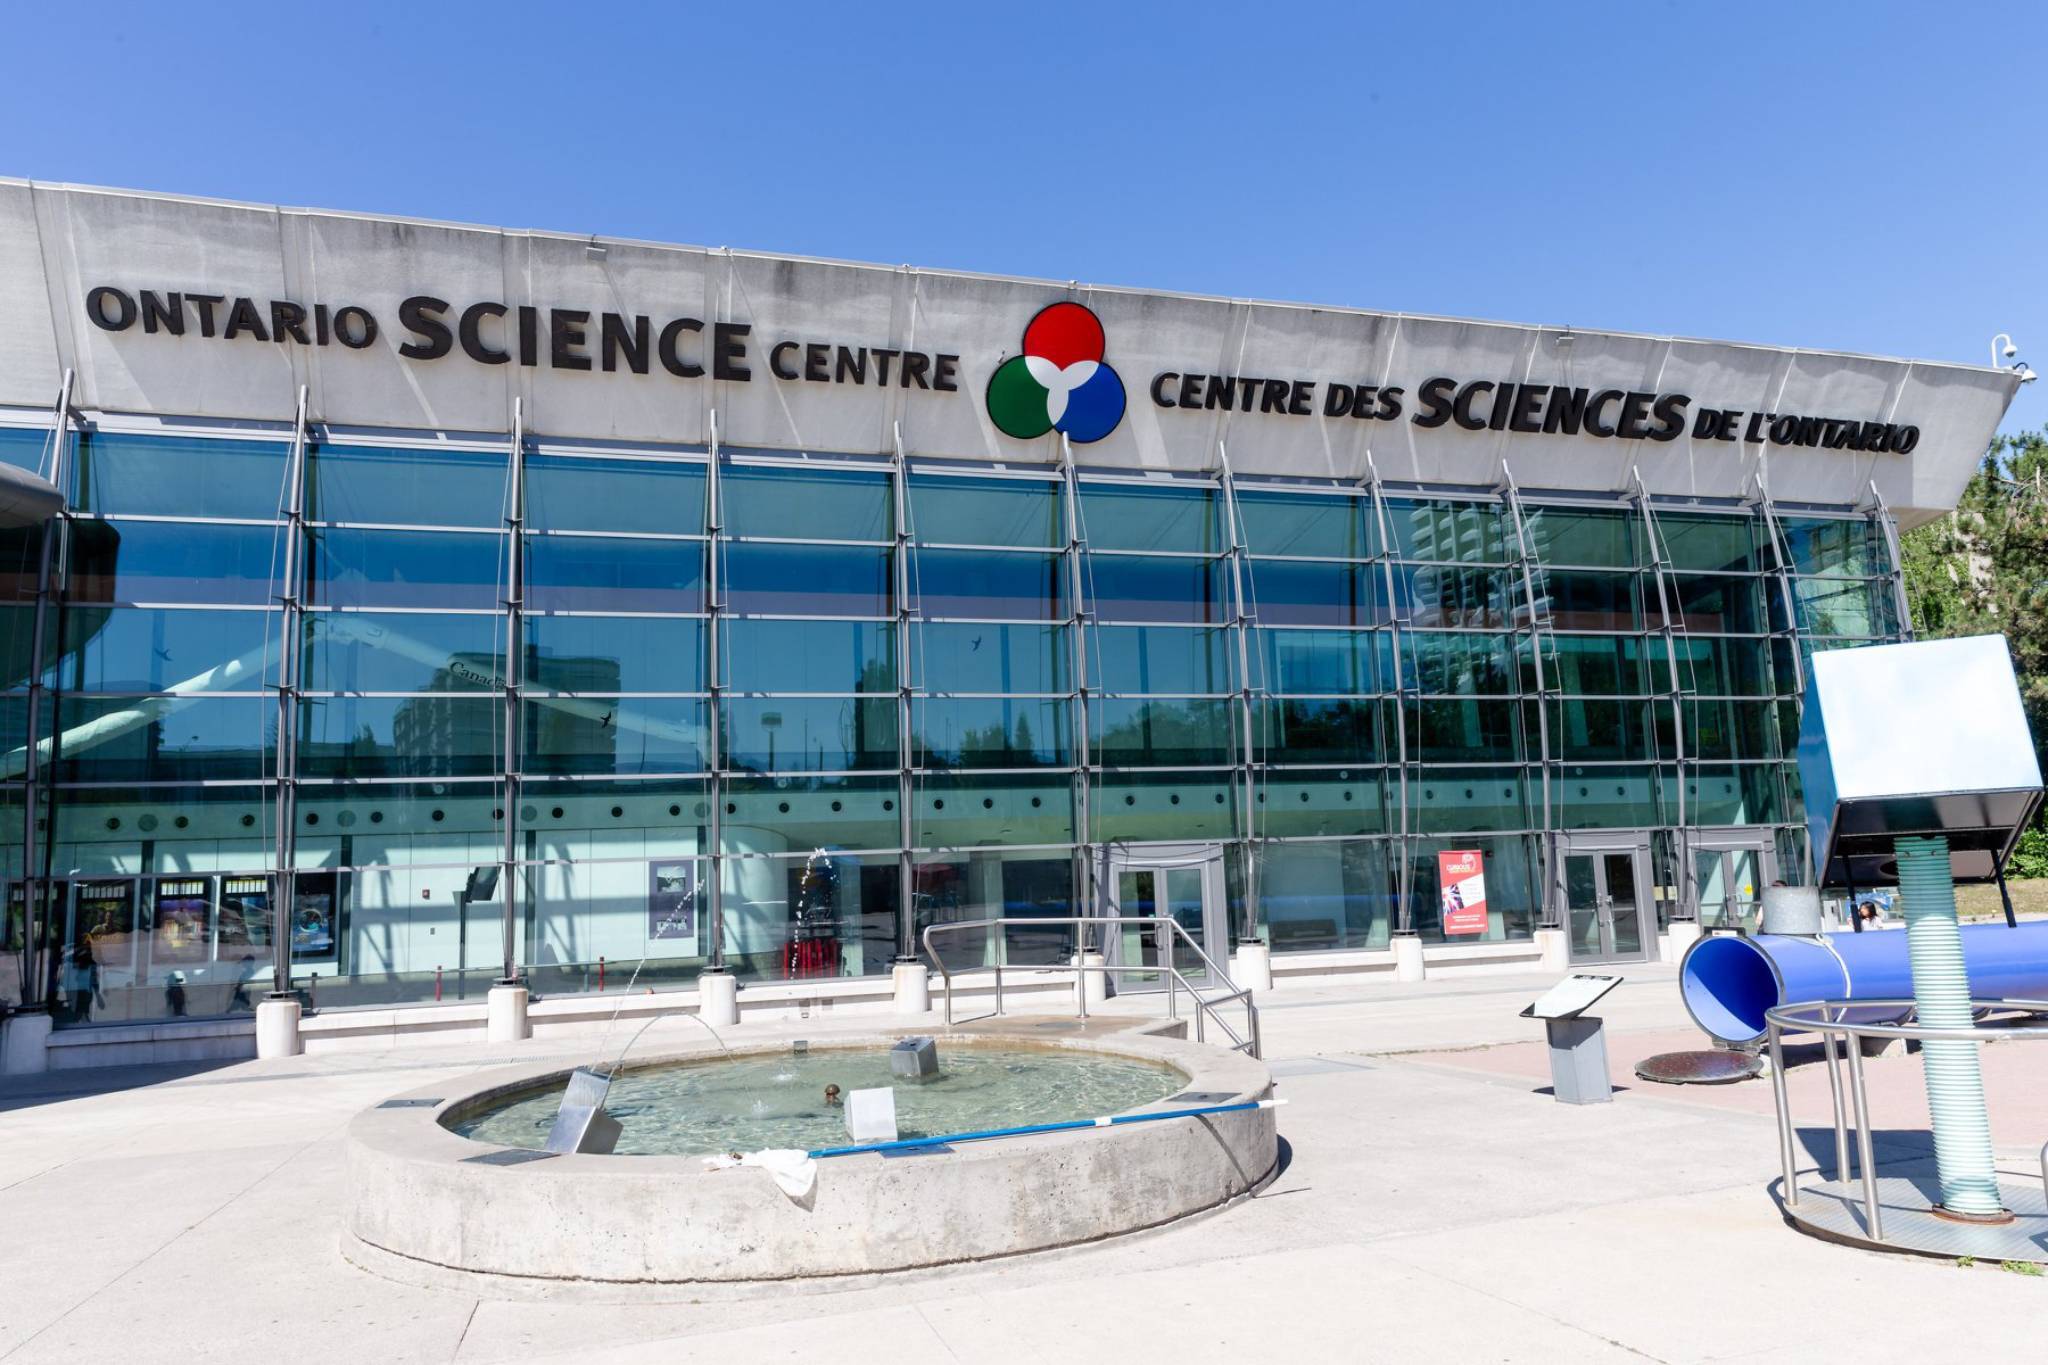 The Ontario Science Centre is offering free admission on Canada Day